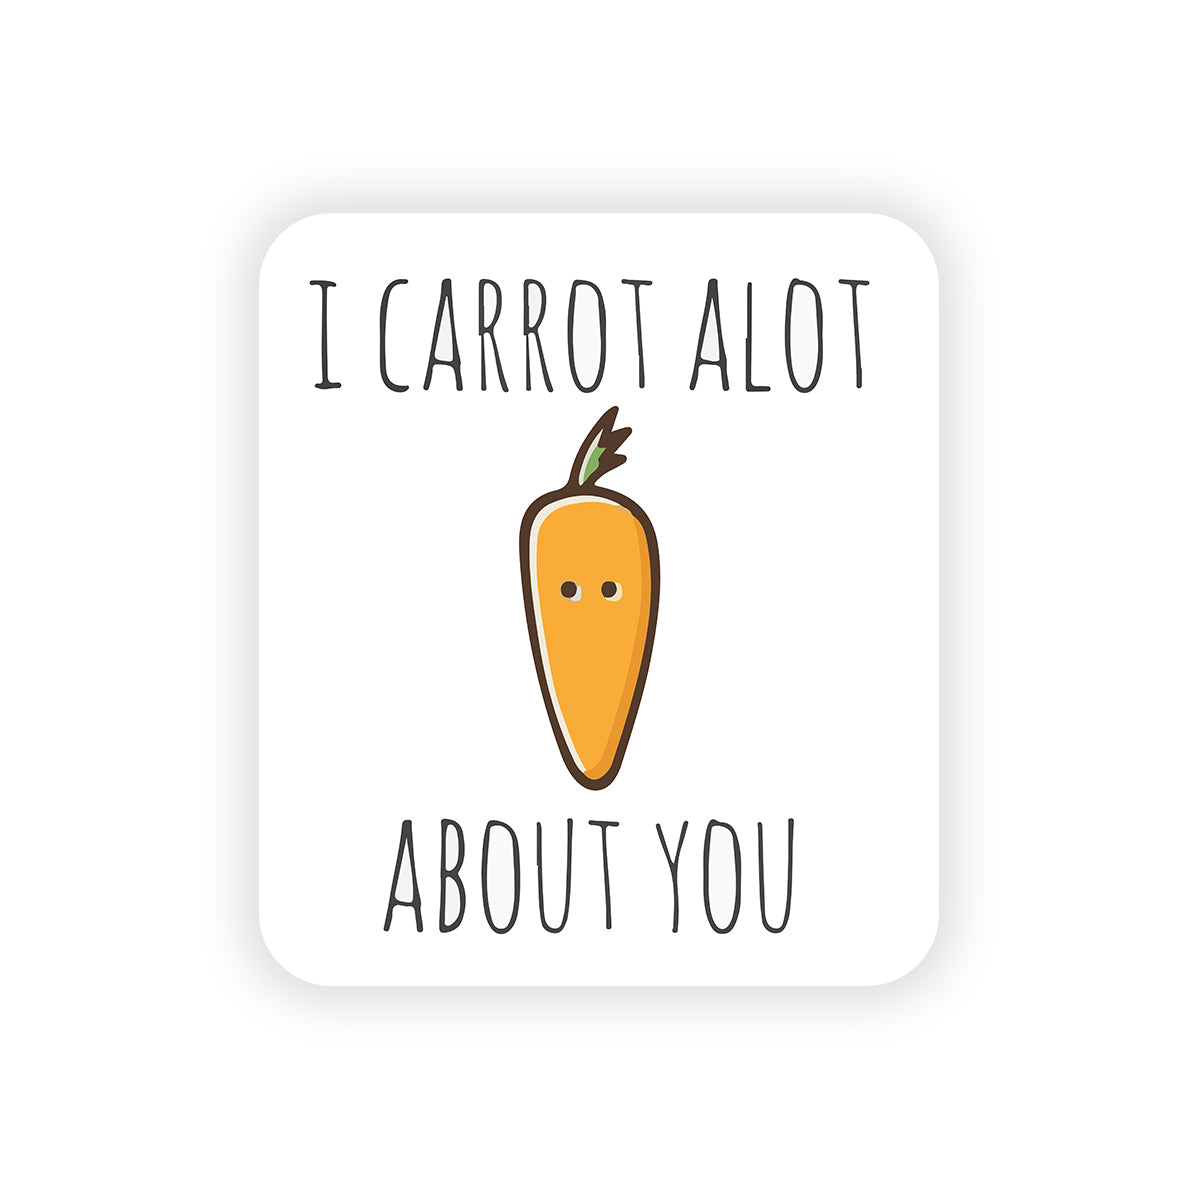 I Carrot alot about you